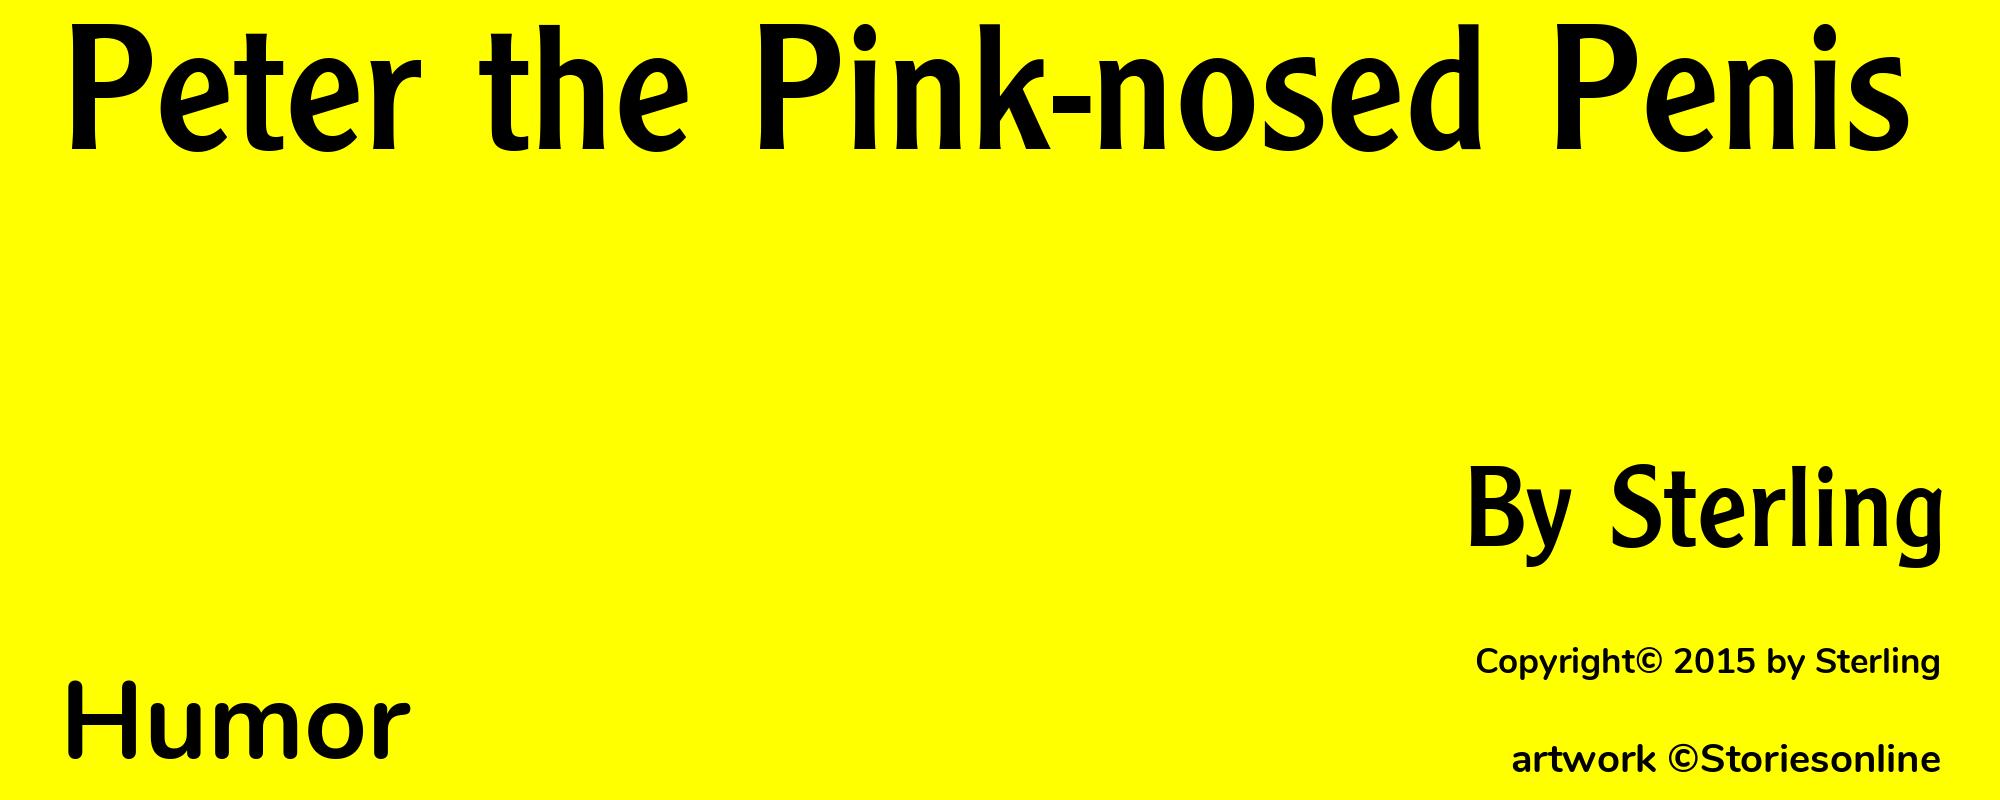 Peter the Pink-nosed Penis - Cover